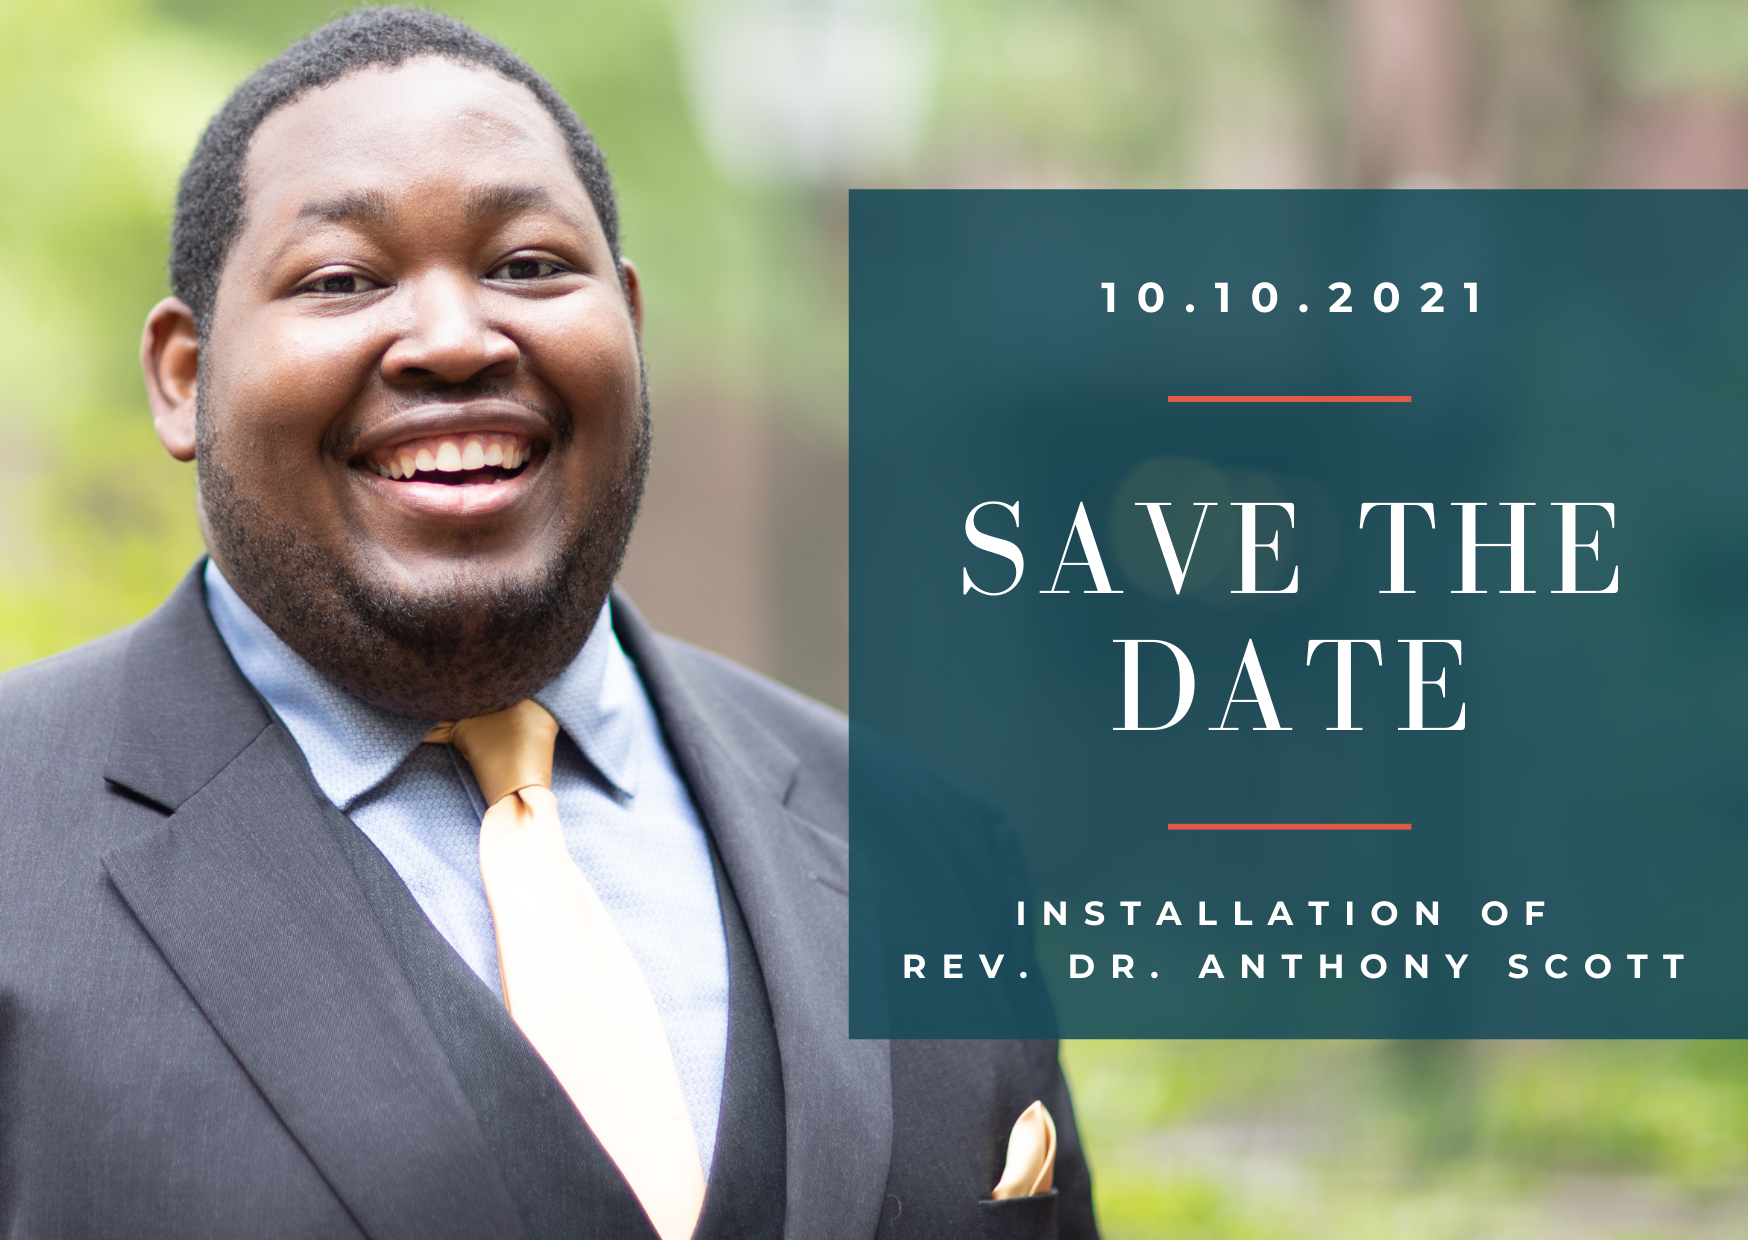 Save the Date! Installation of Rev. Dr. Anthony Scott